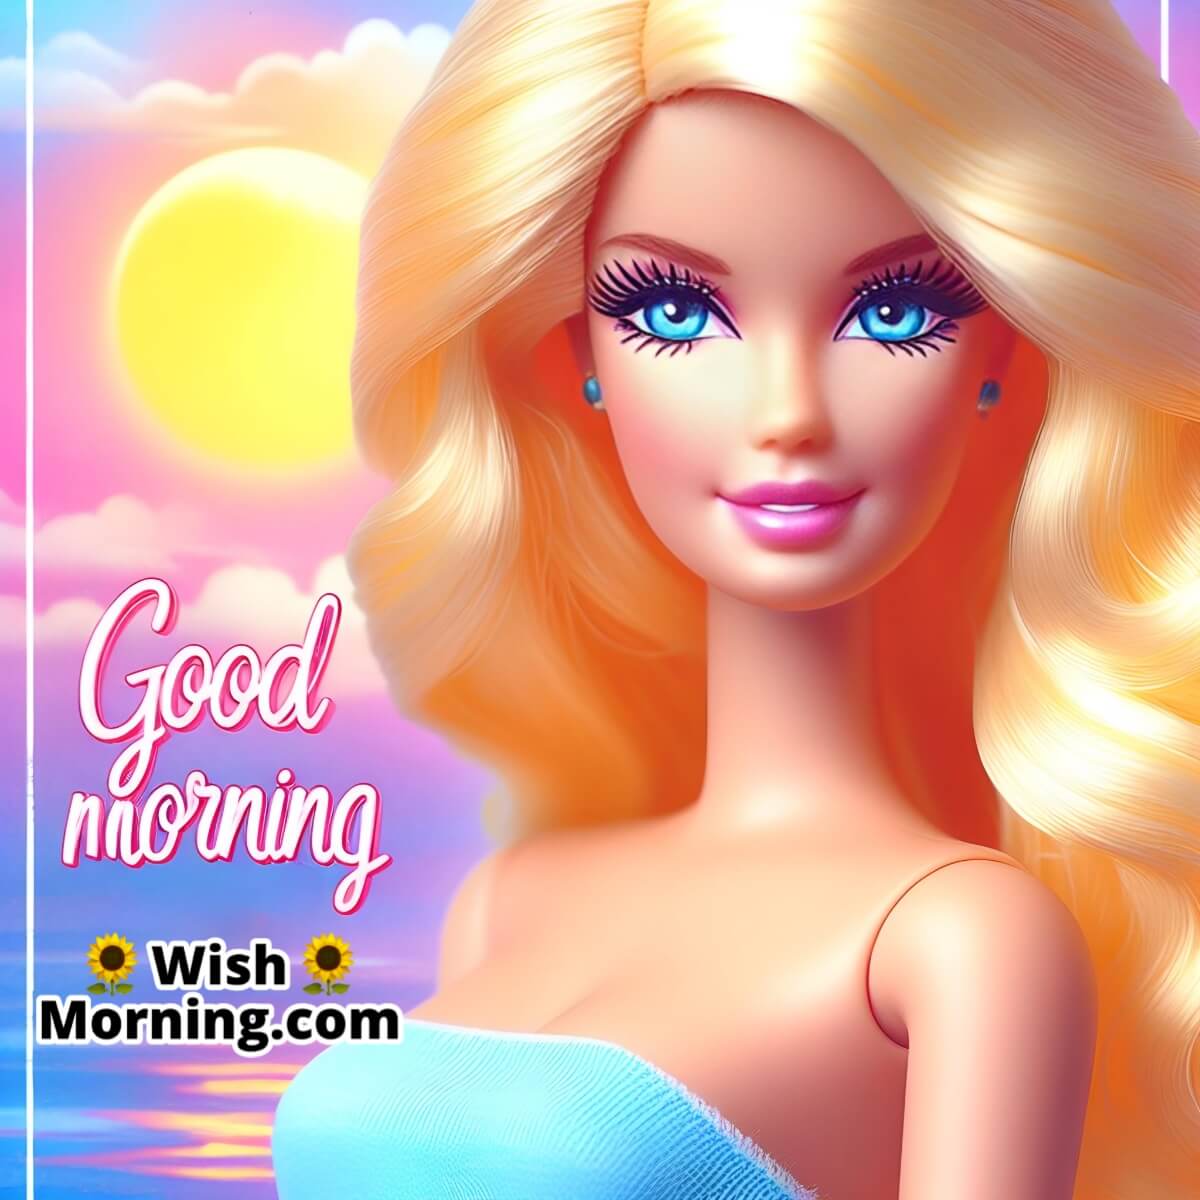 Sunrise With Barbie's Blonde Ambition